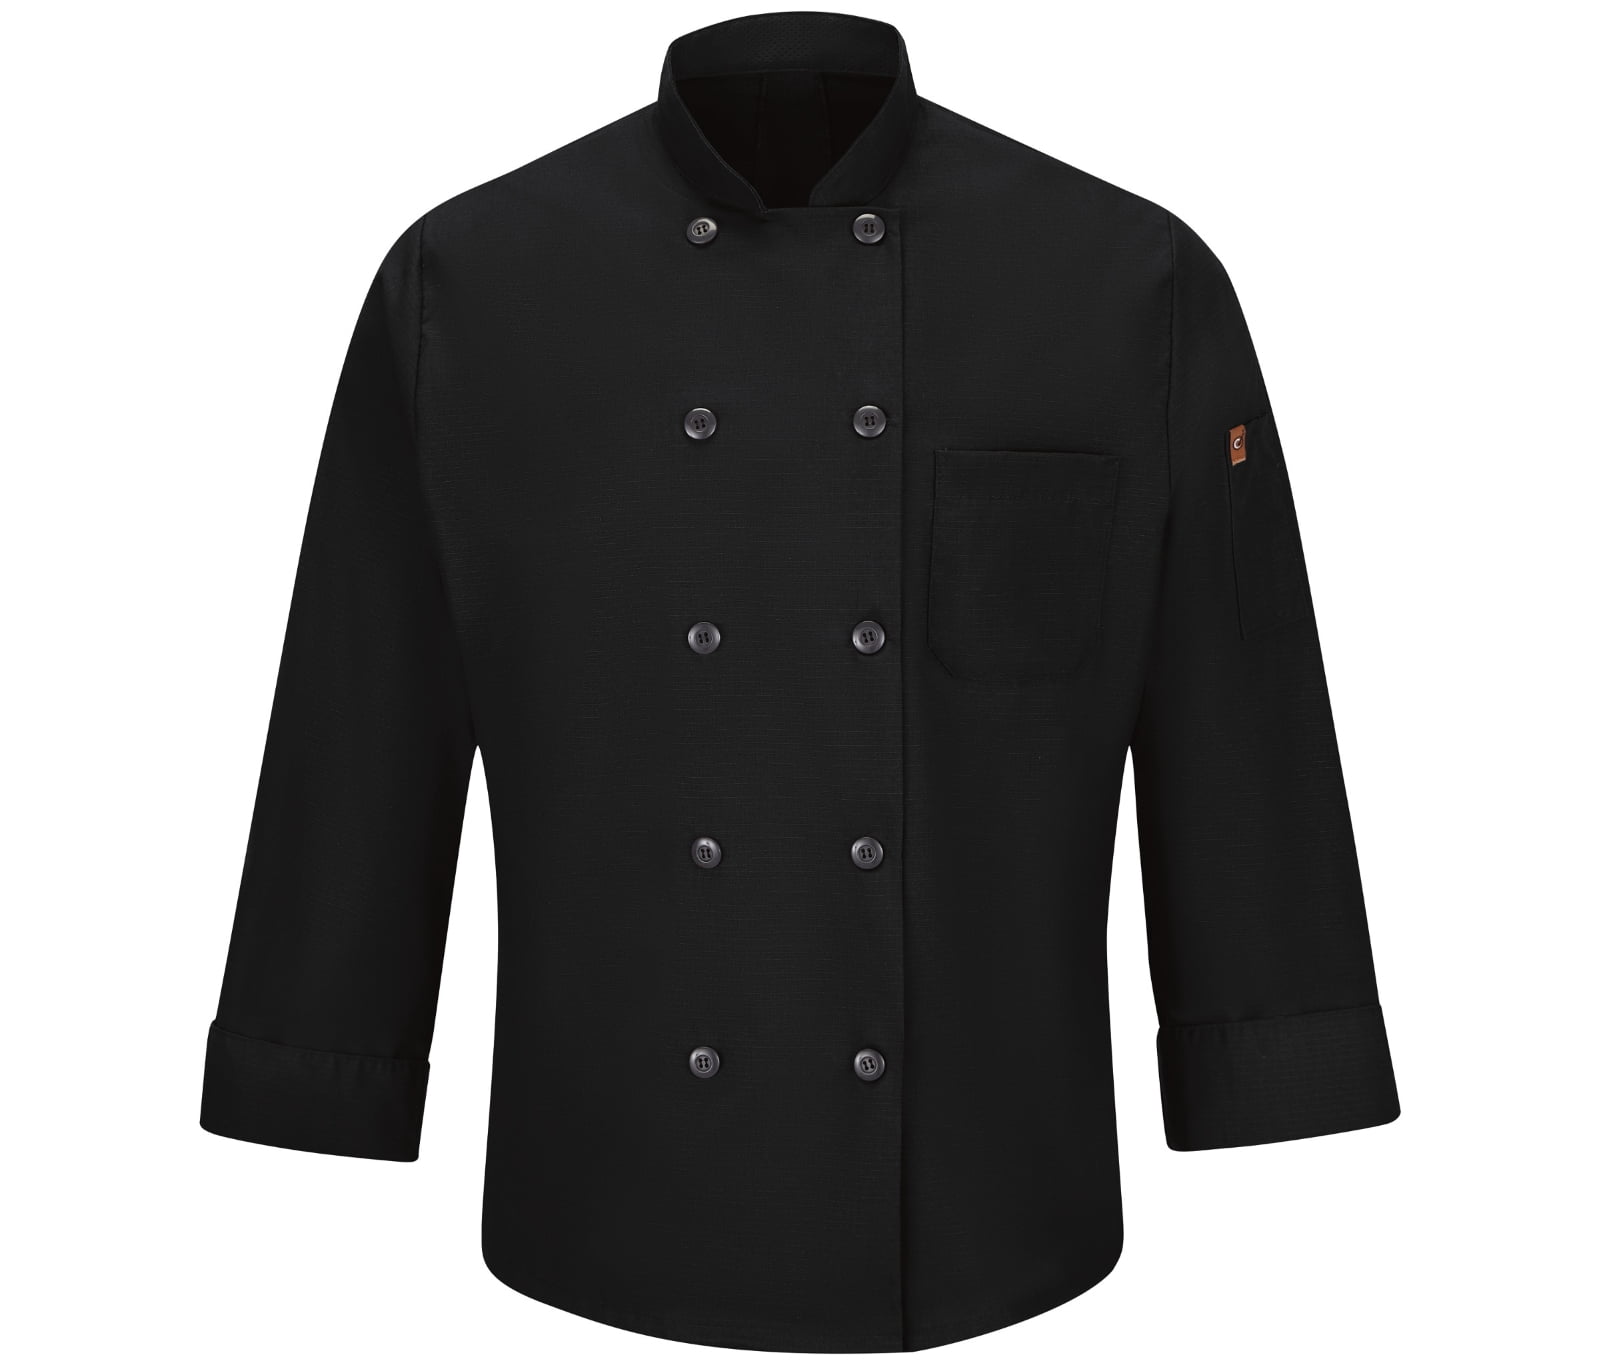 Red Kap Men's Long Sleeve Ten Button Chef Coat with Mimix and Oilblok ...